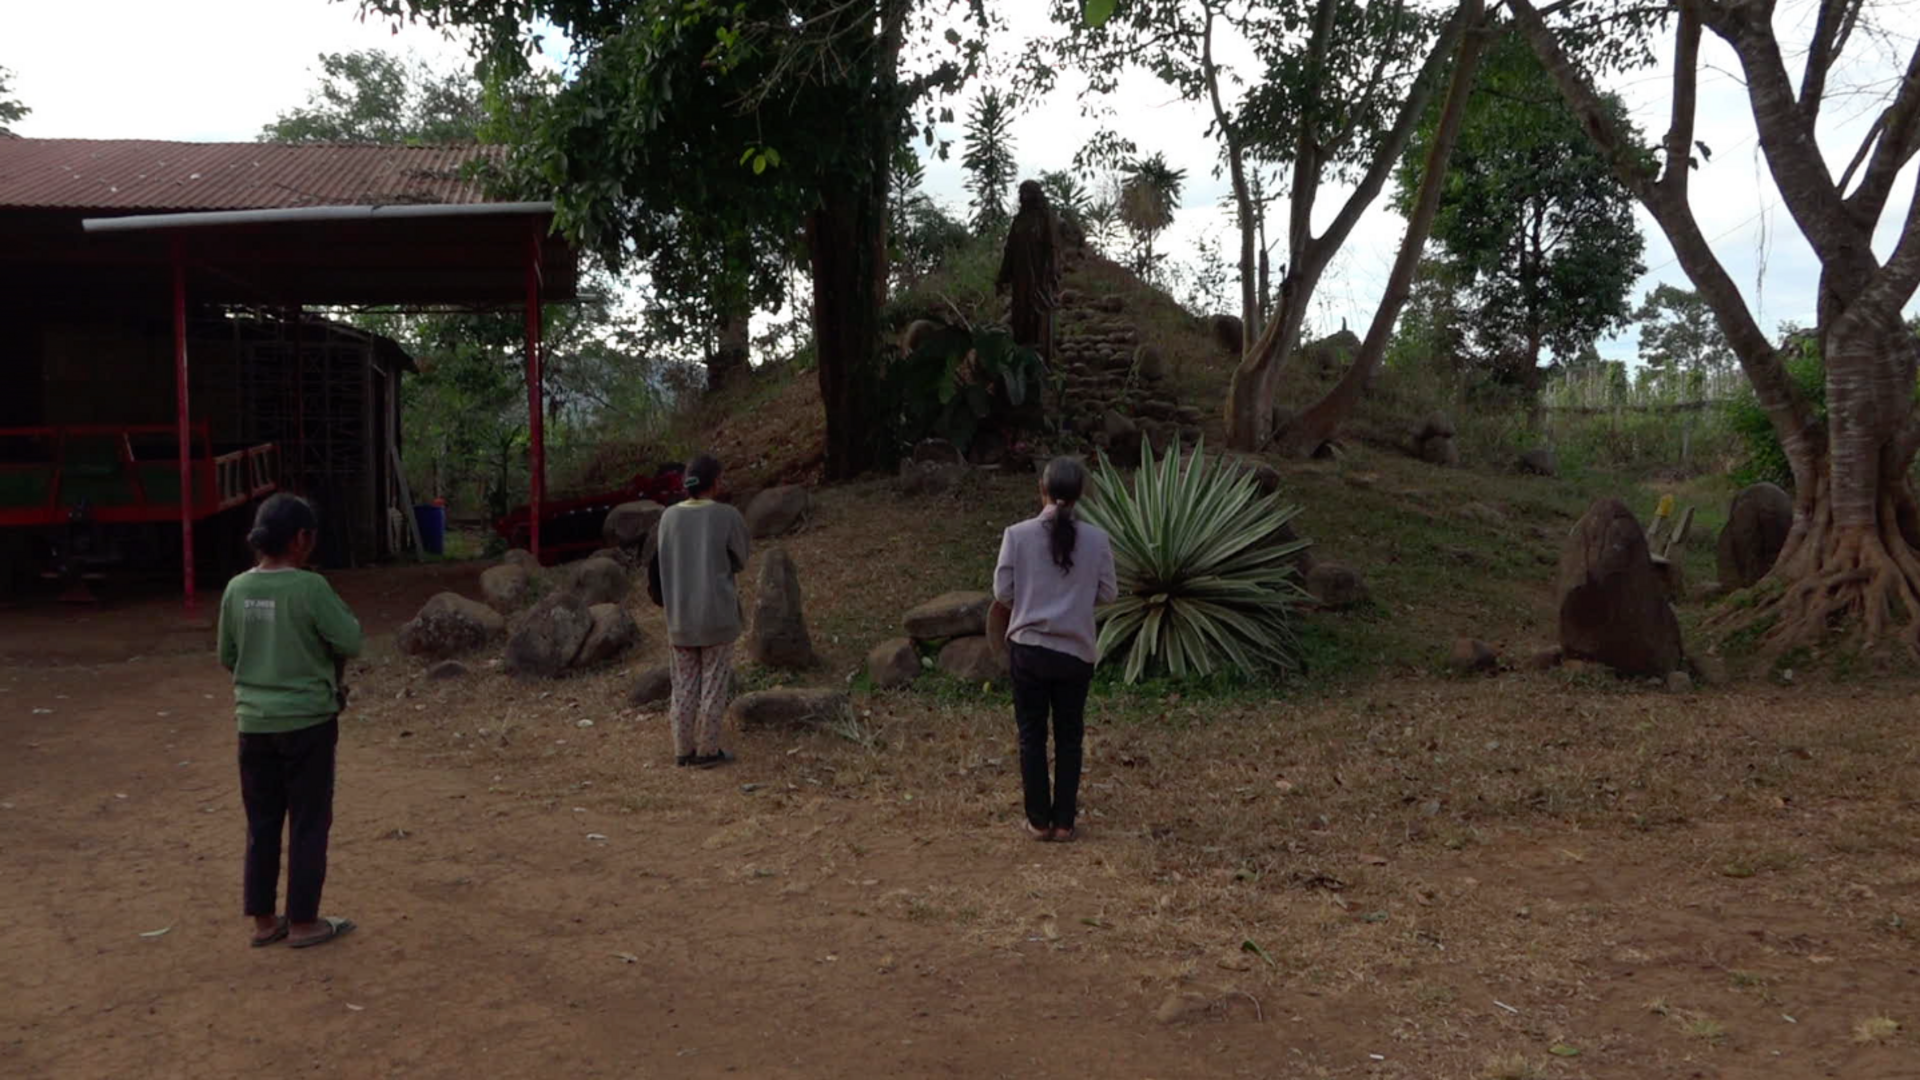 Video still: Back view of three people with their hair tied together, standing in front of a small hill with stone steps.